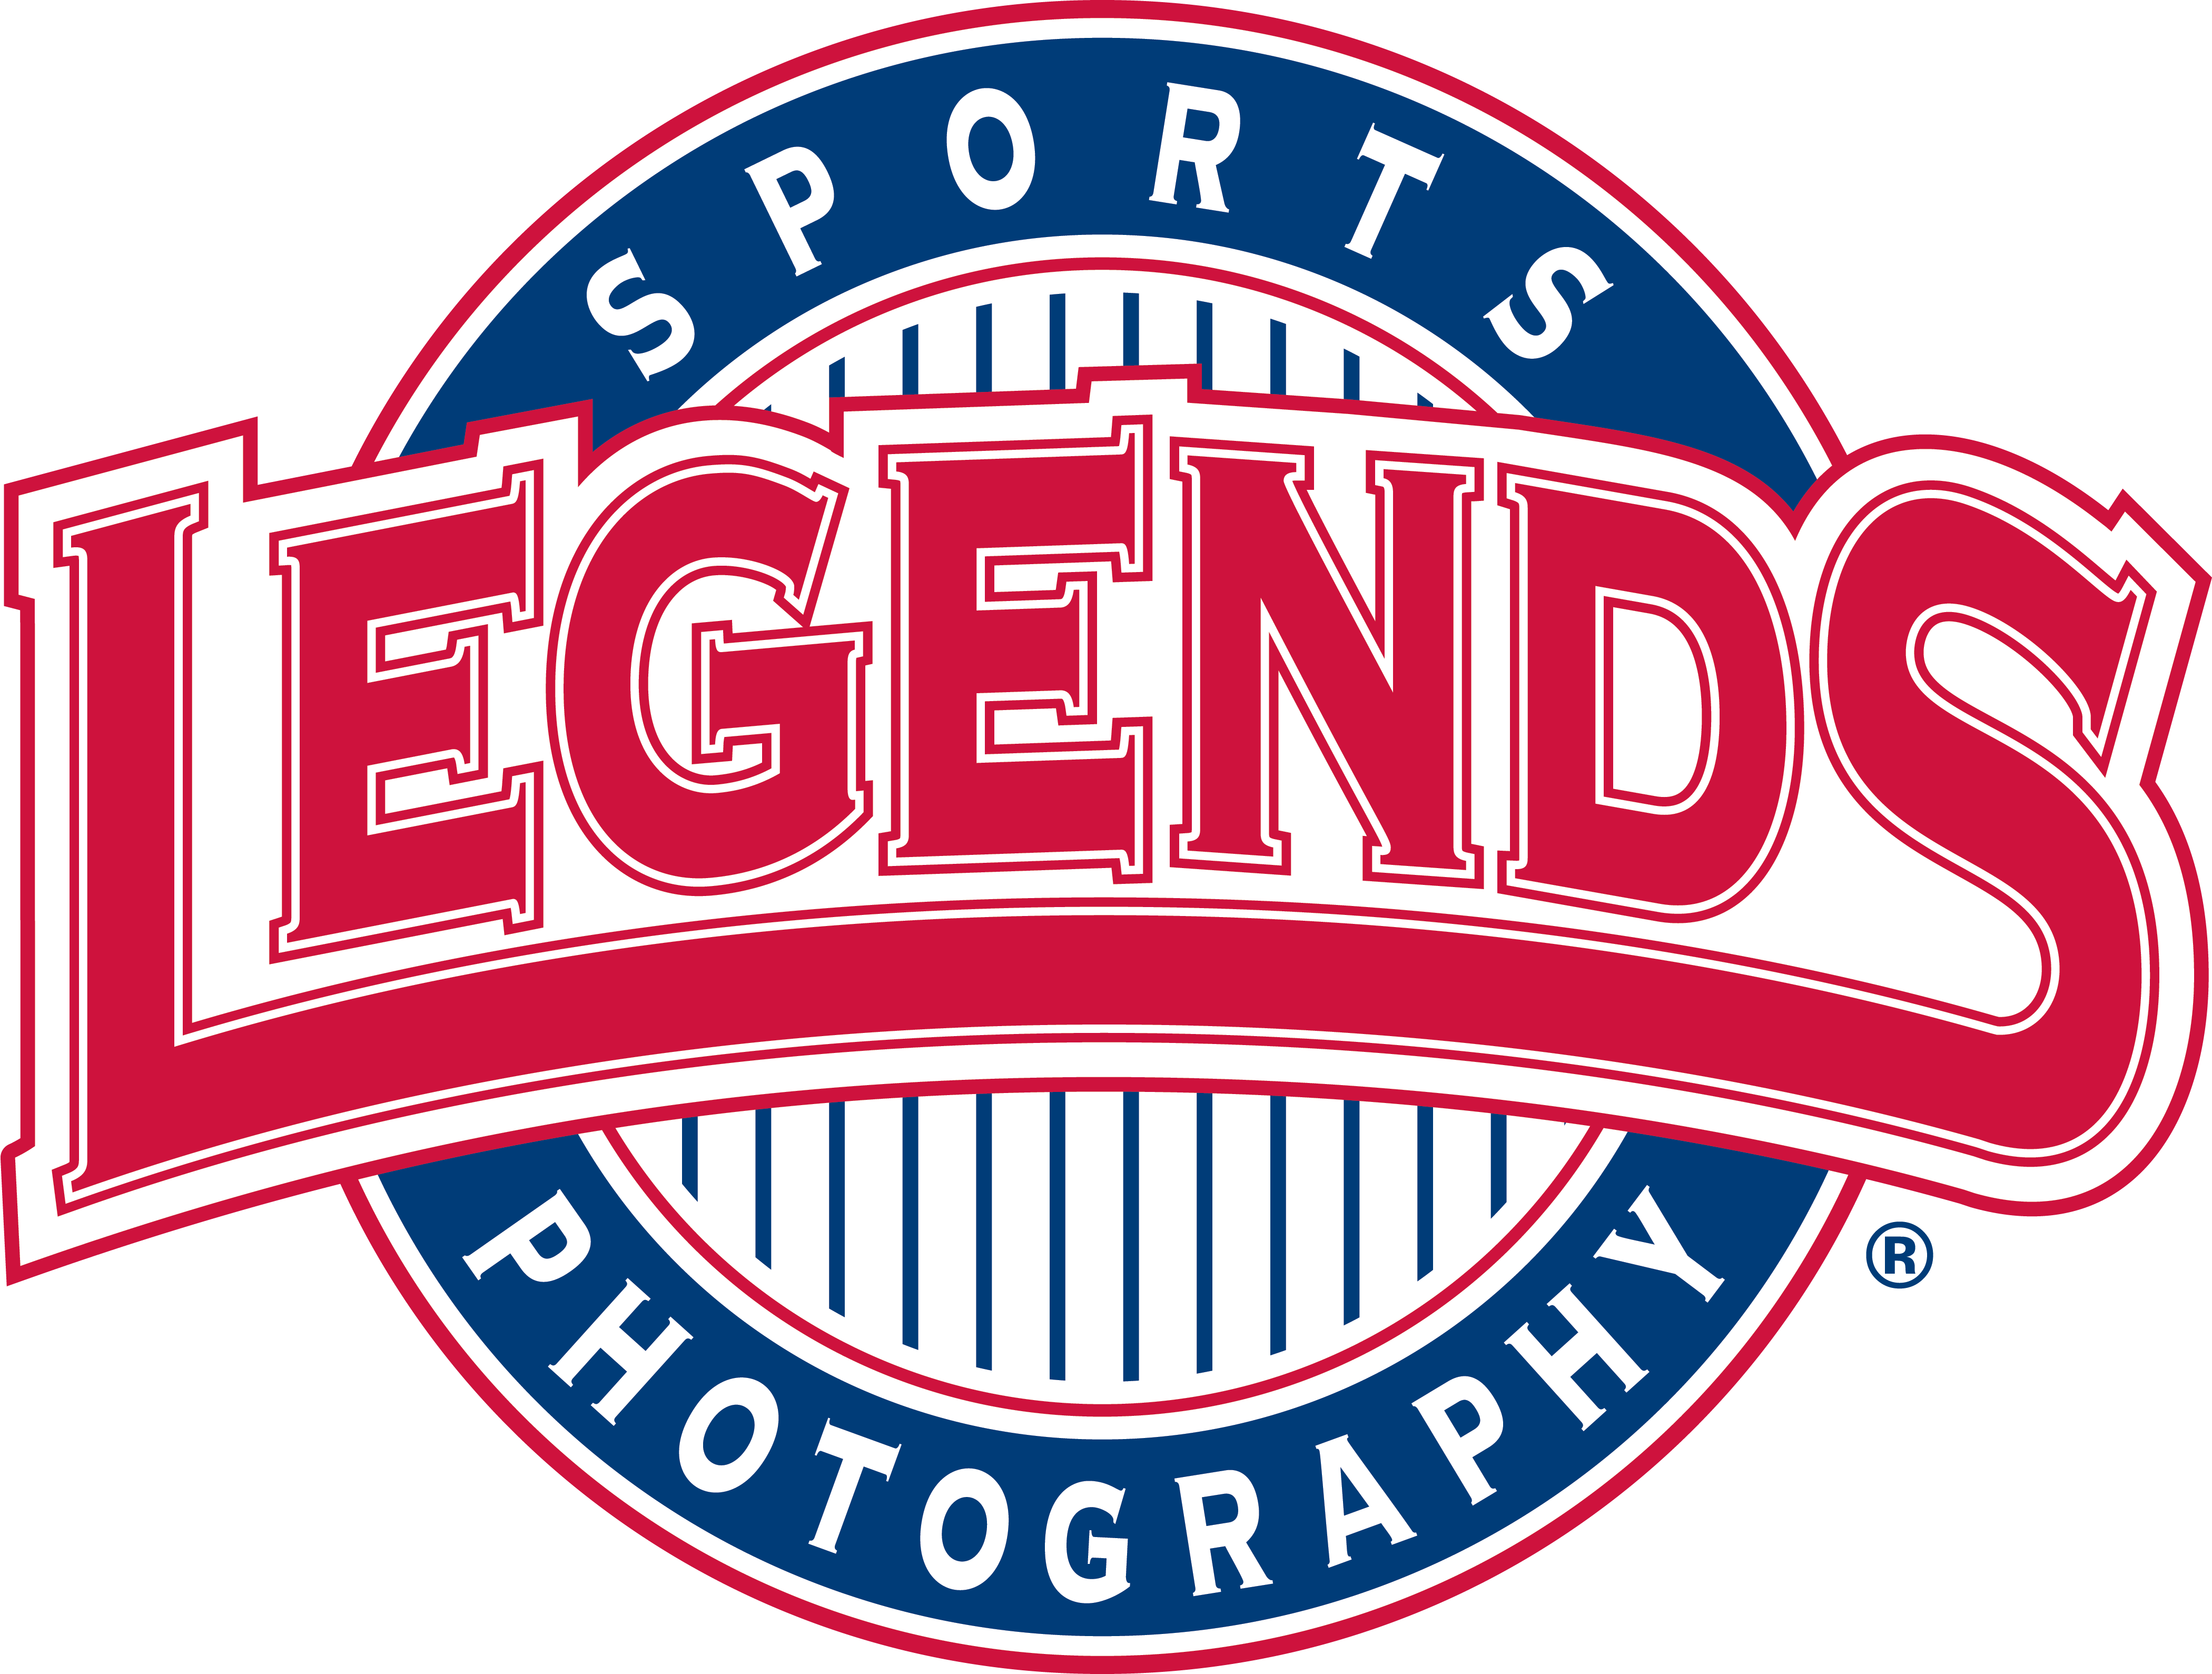 Legends of Texas Sports Photography